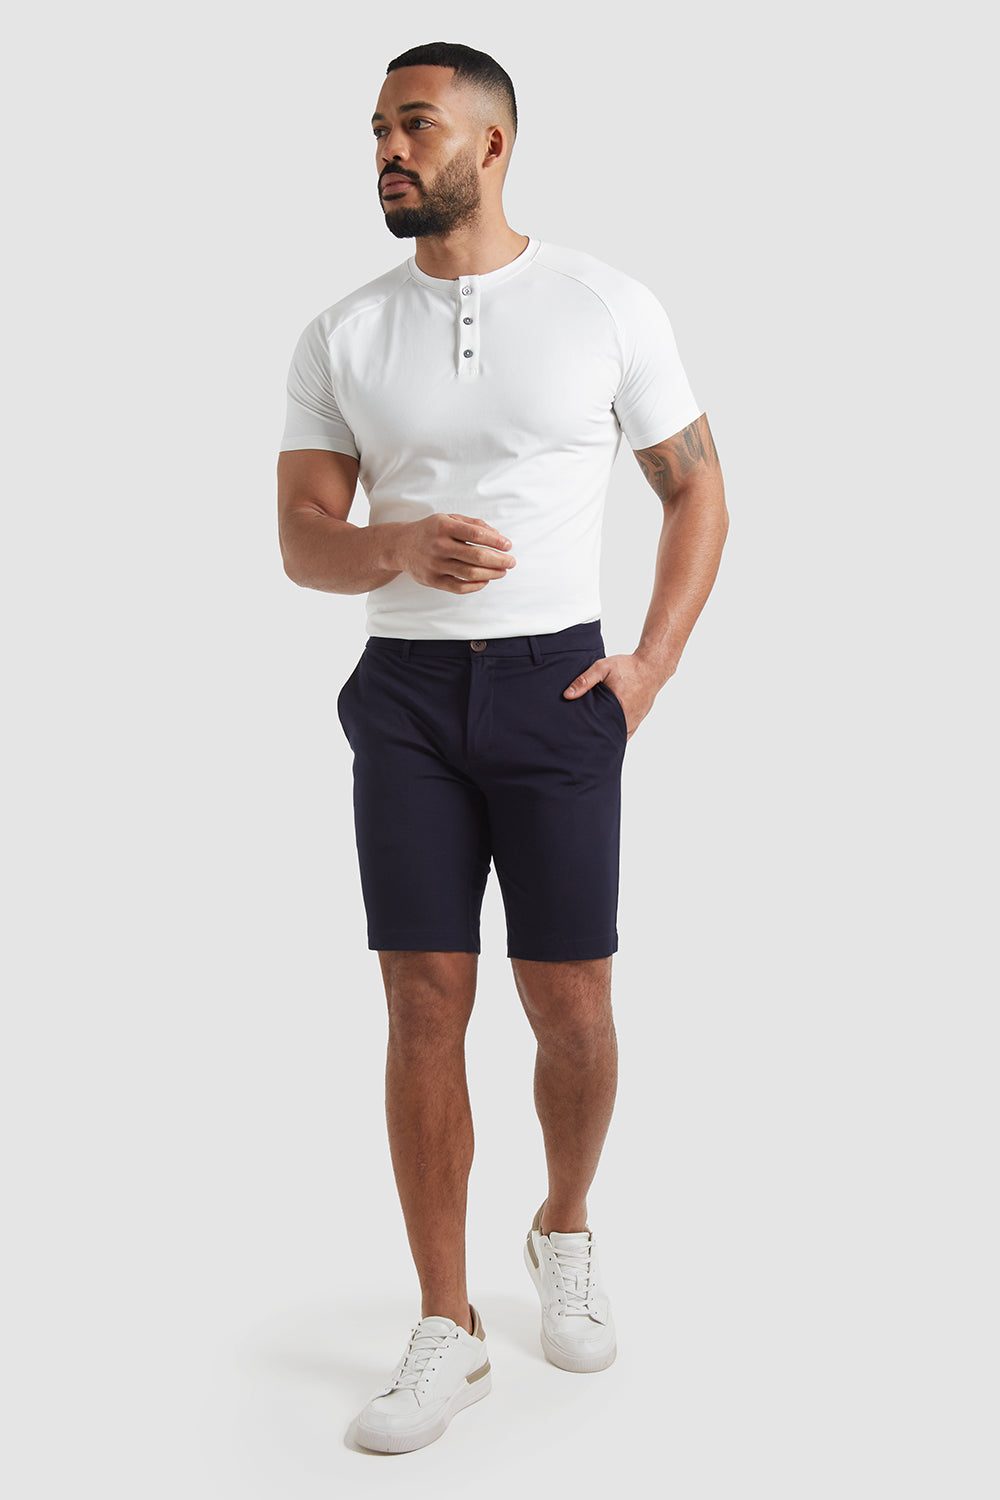 Shorts TAILORED Chino Navy Athletic in - ATHLETE - Fit USA